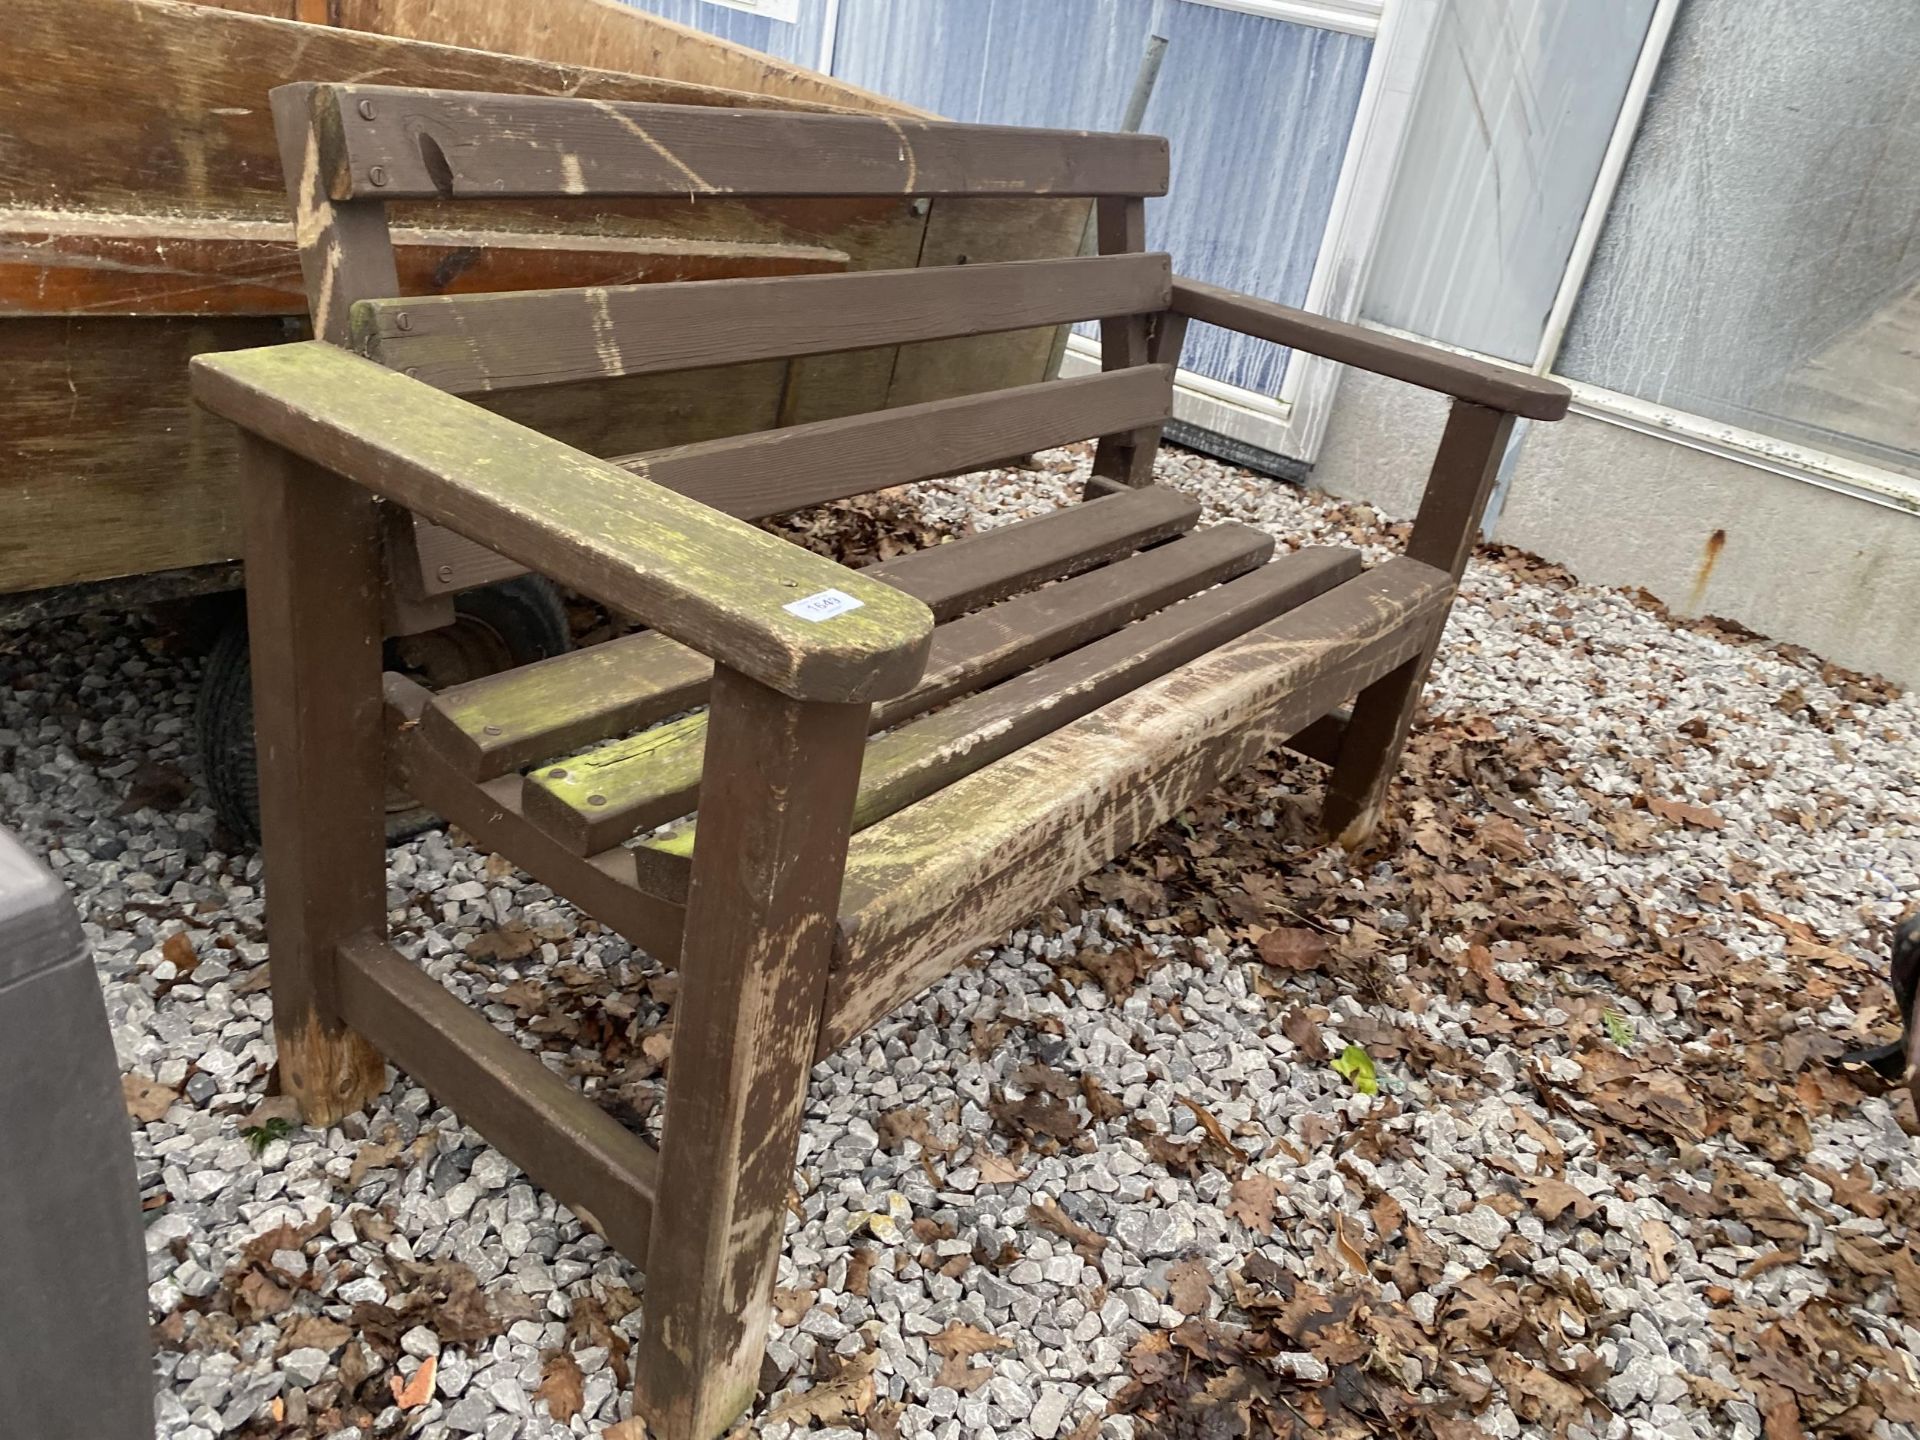 A TWO SEATER WOODEN GARDEN BENCH - Image 2 of 2